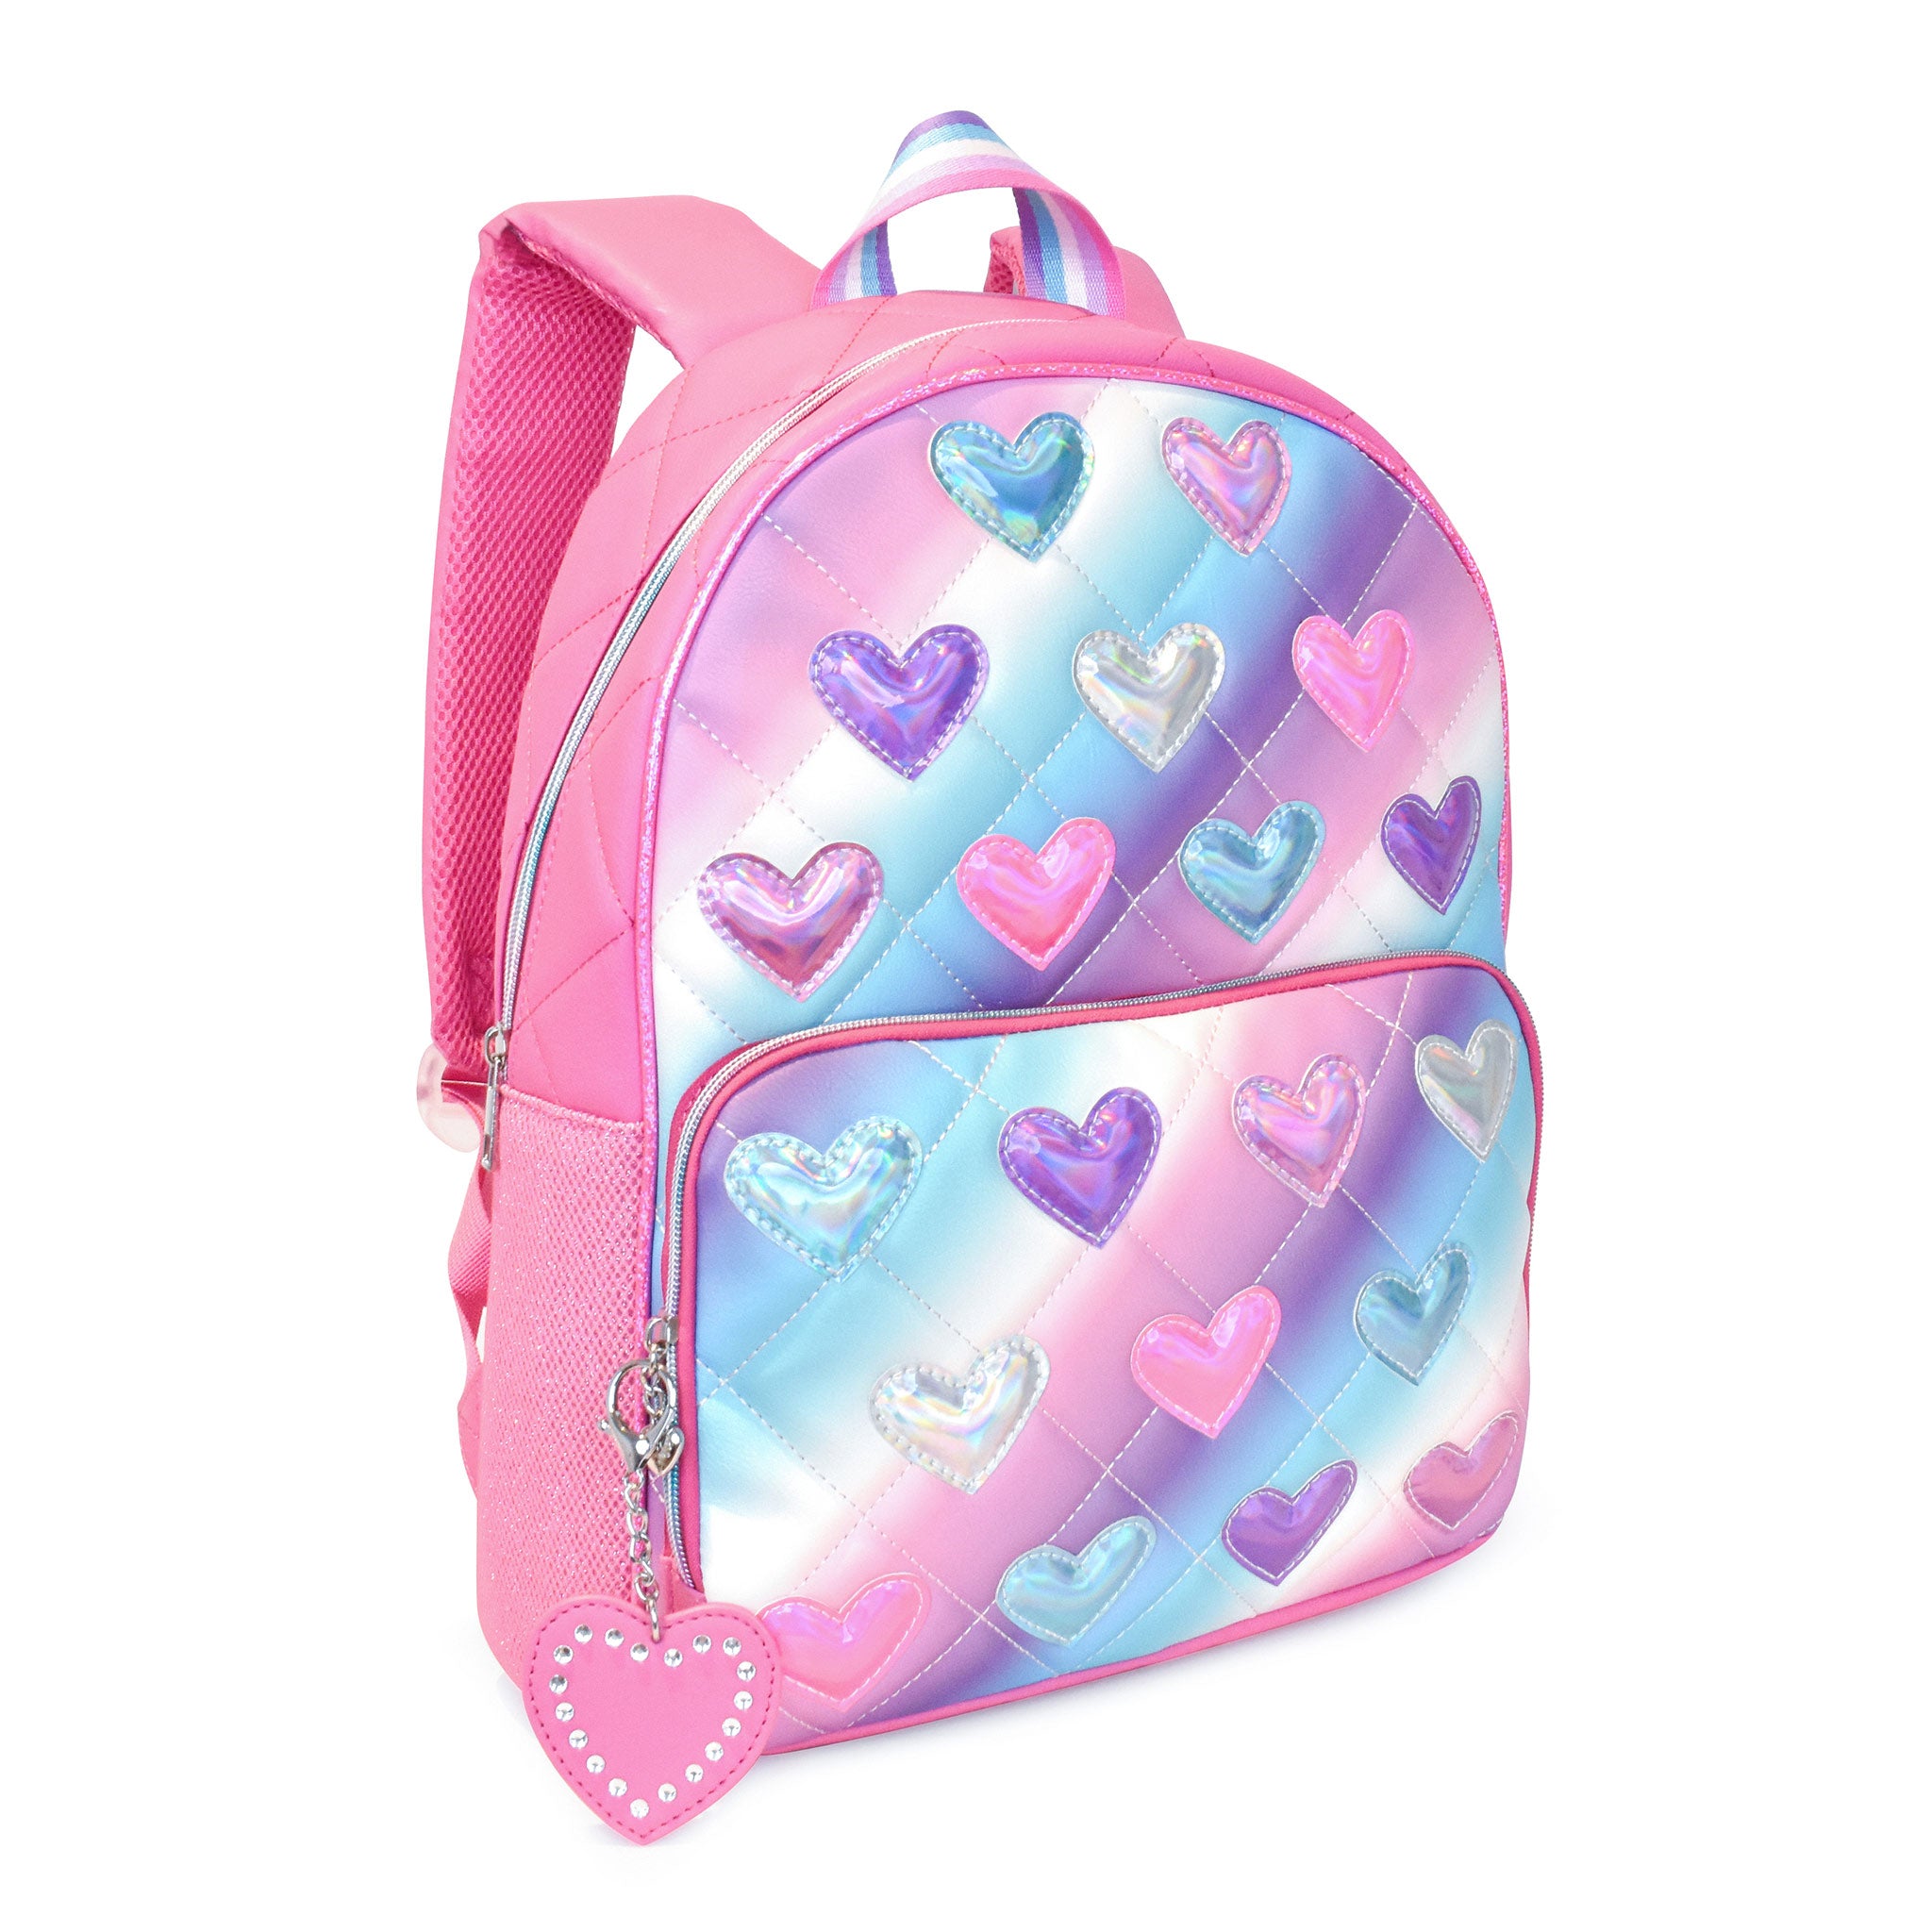 Side  view of a cool-pastel ombre large backpack with metallic heart patches and a detachable heart keychain